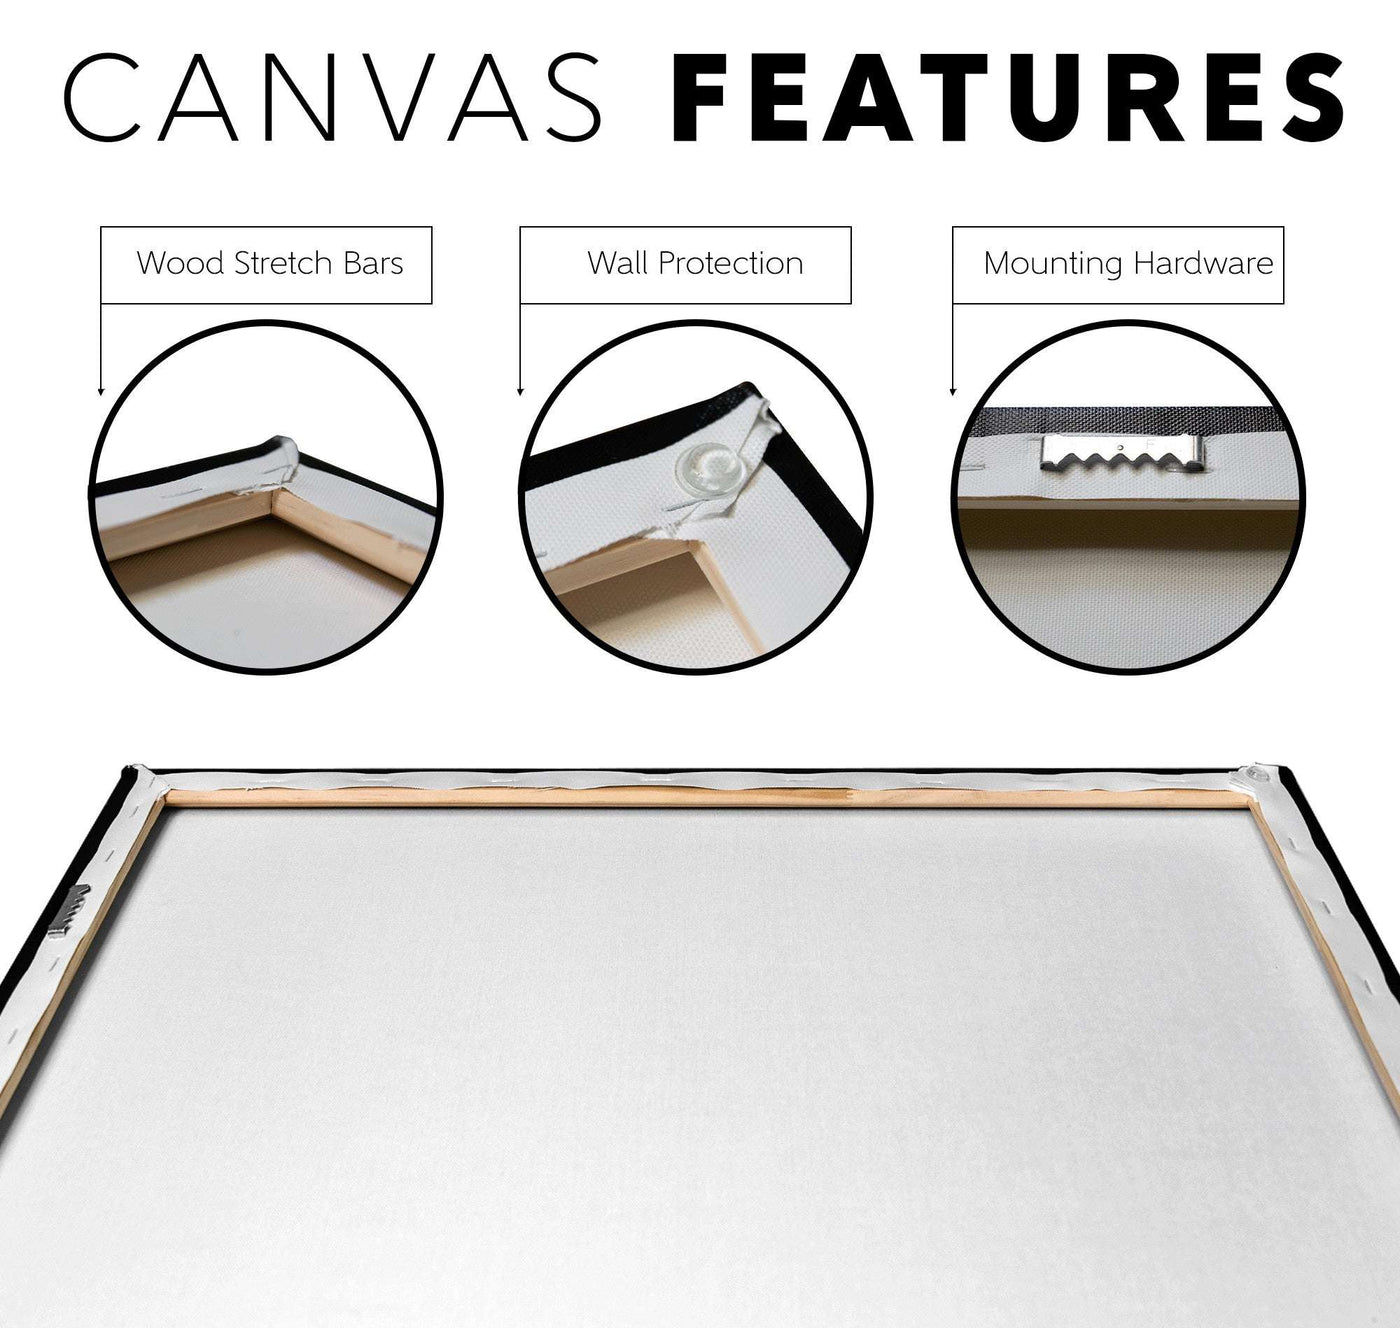 Diagram showing features of a Honeycomb Harmony Canvas Print including wood stretch bars, wall protection, and mounting hardware, with labeled close-up images and a full view of the canvas's back.